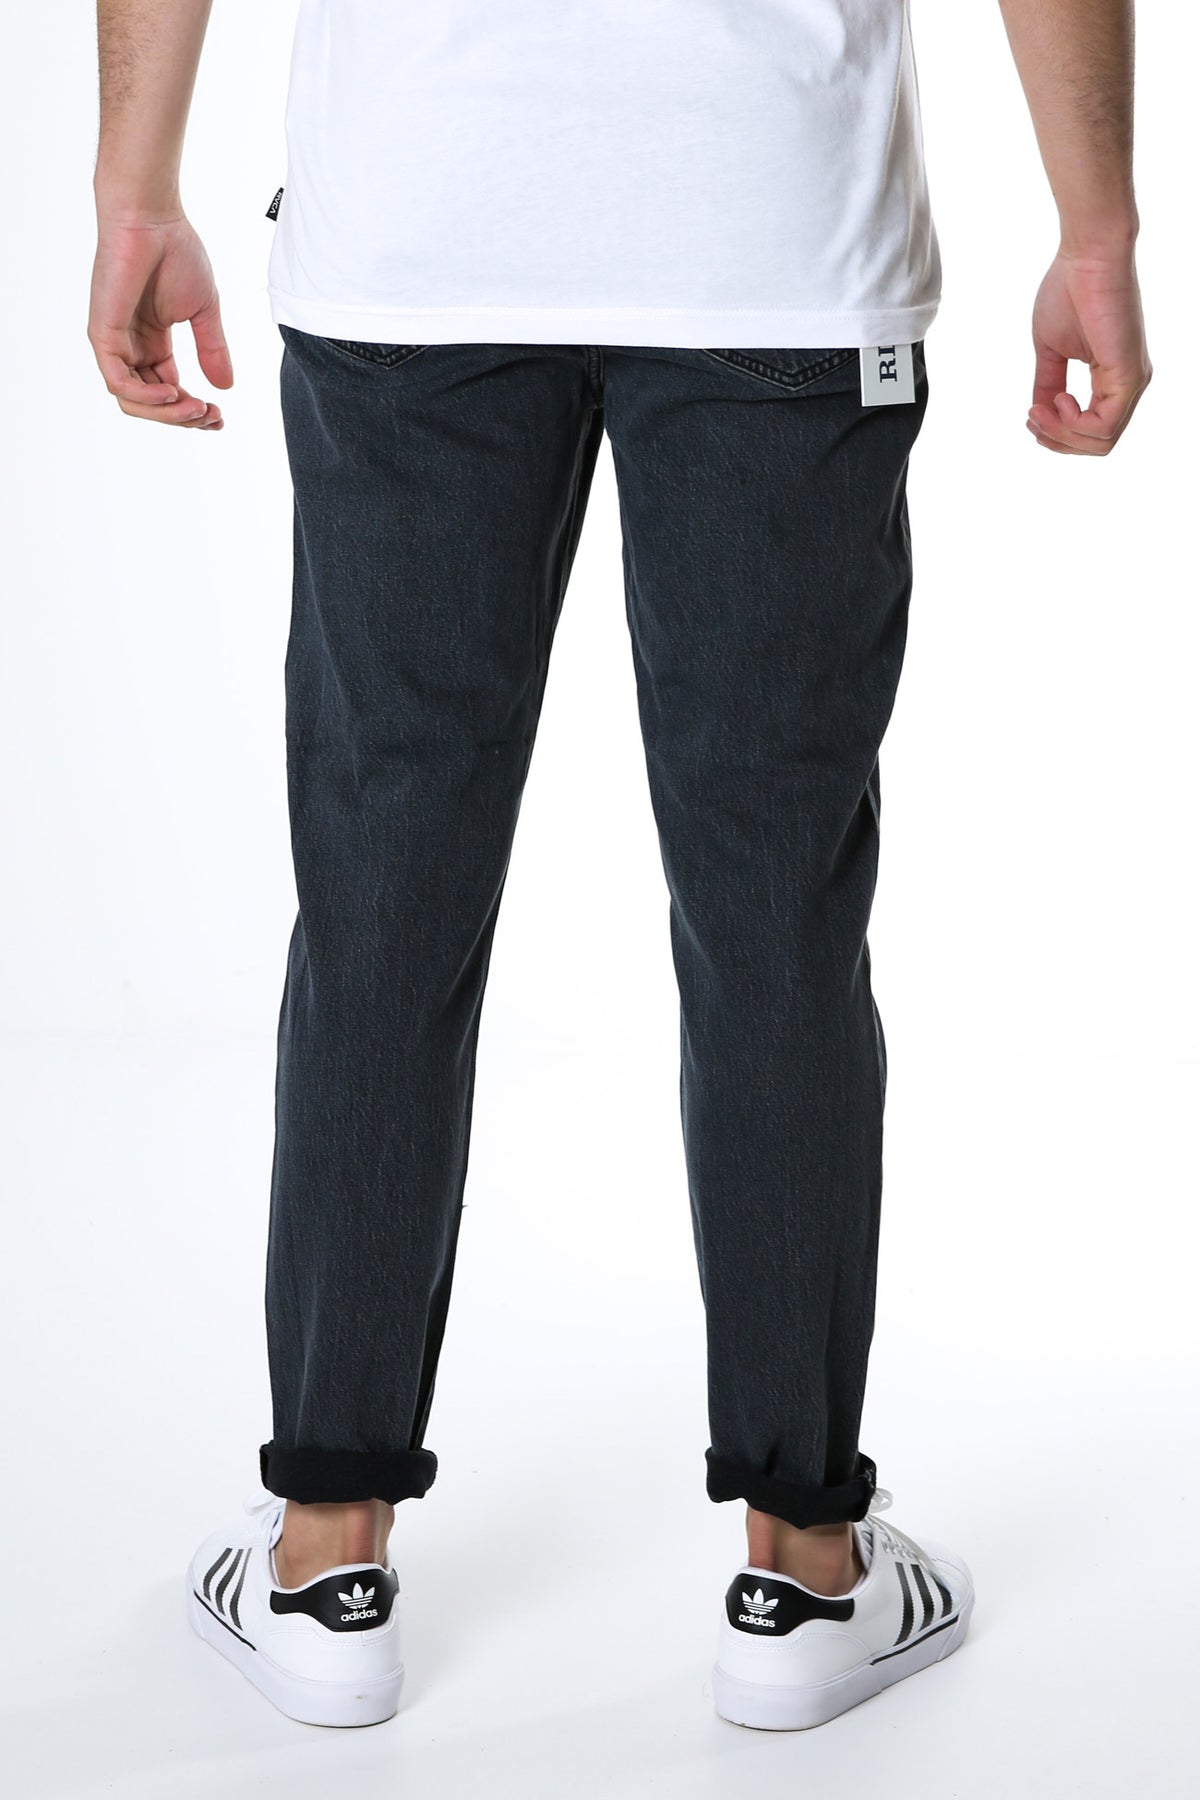 R3 Relaxed Taper Jean Black Fade - Jean Jail